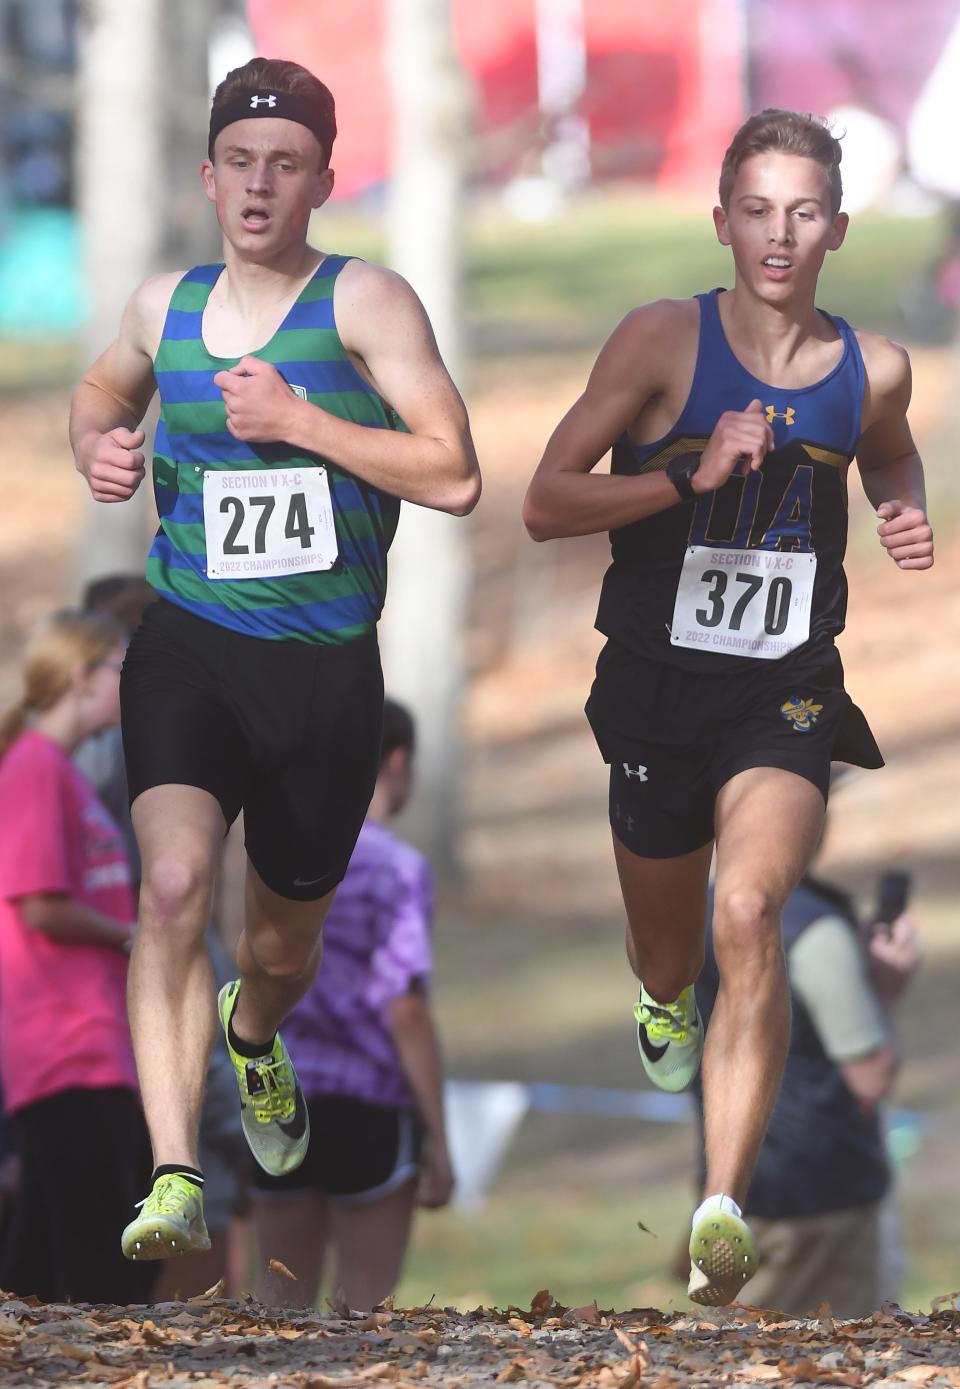 Oakfield-Alabama junior Connor Domoy, right, won the Class D title, and Drew Reigelsperger of Bloomfield/Naples placed third at the Section V Cross Country Championships at Letchworth State Park on Nov. 5, 2022.